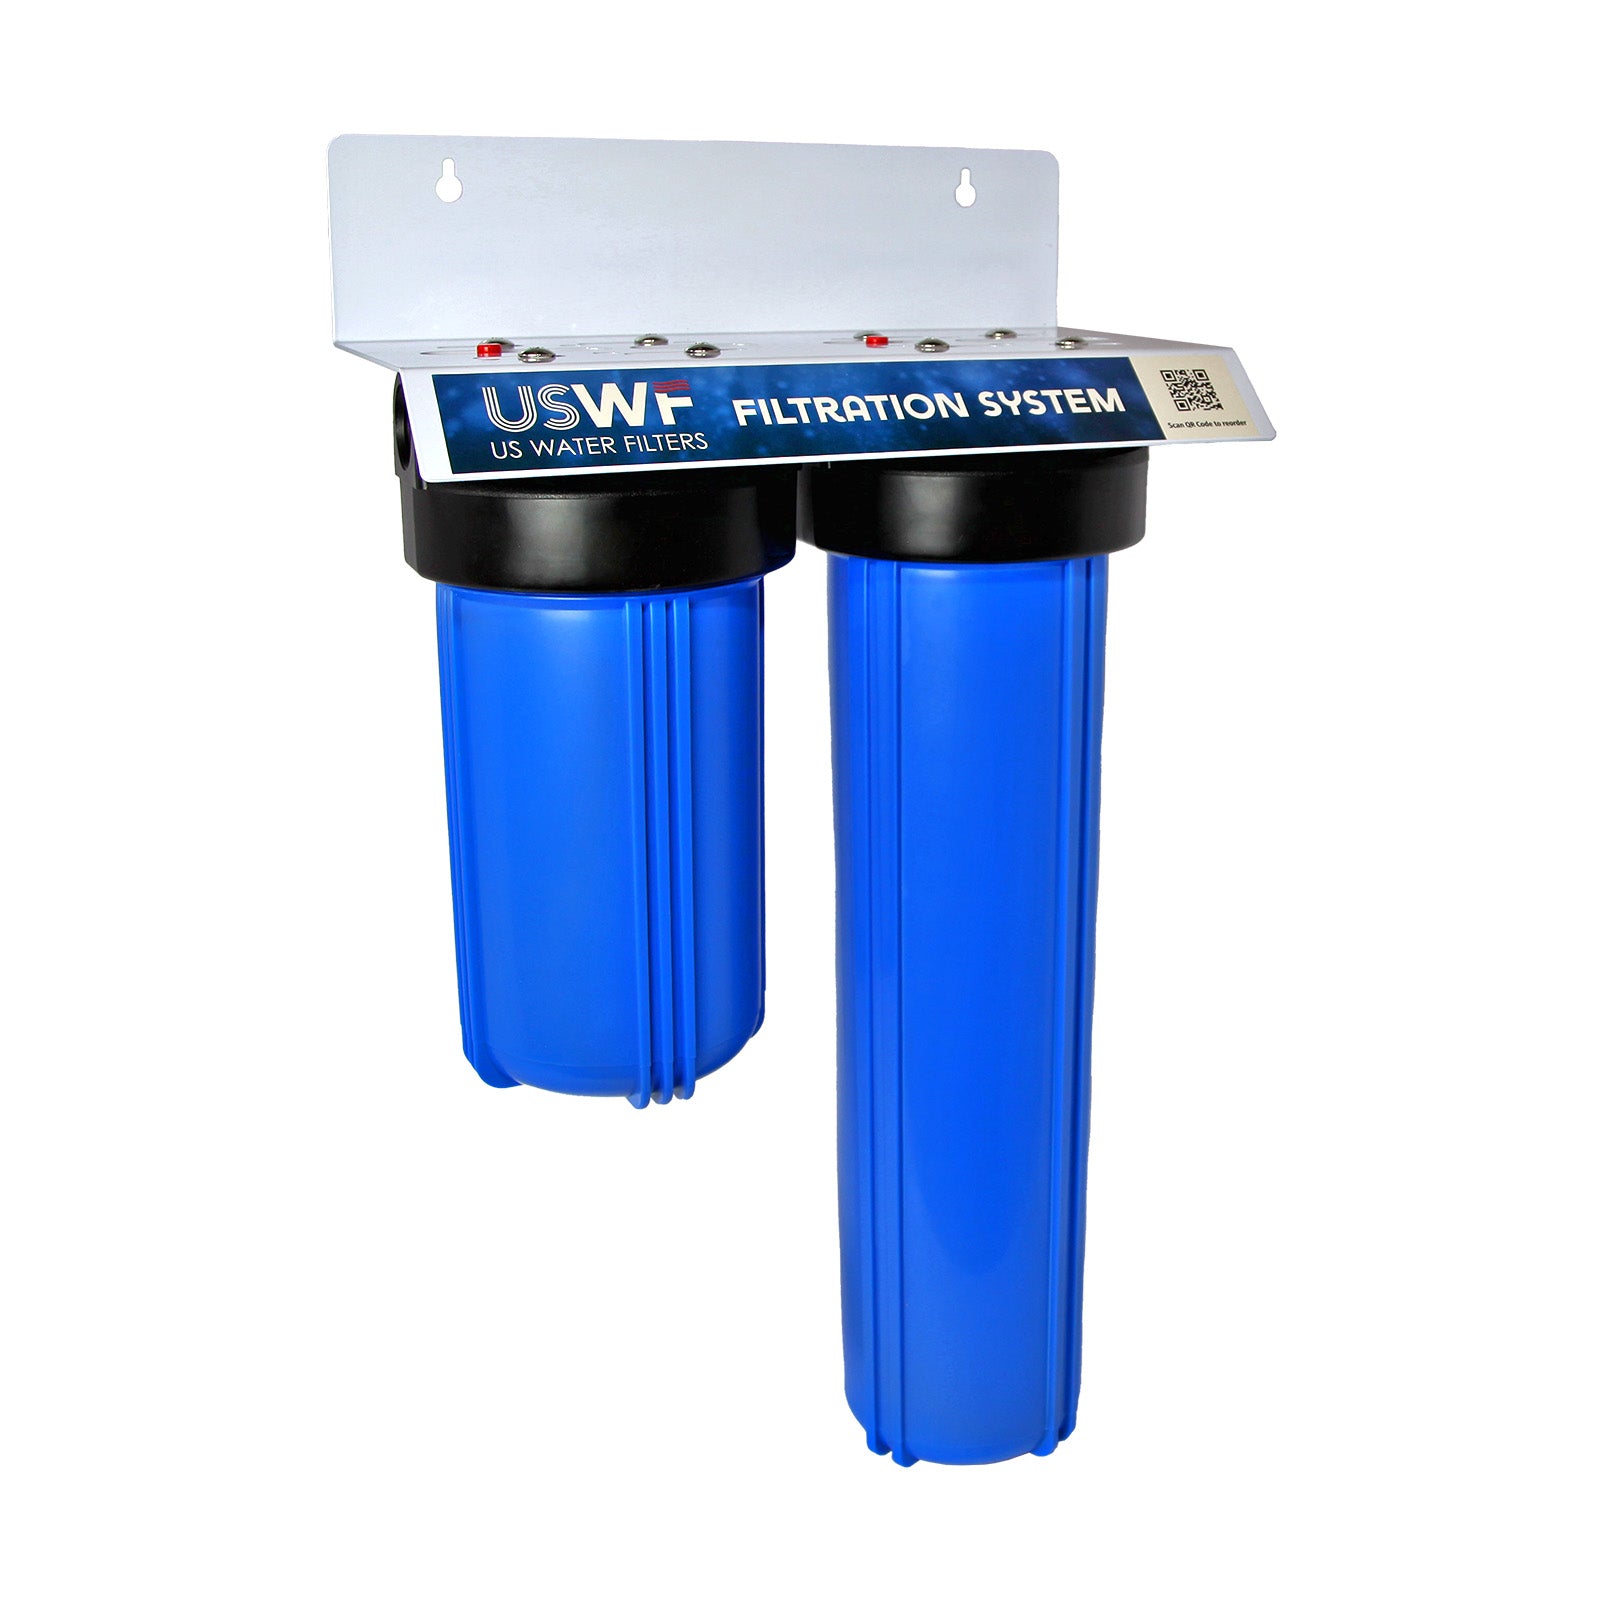 2-Stage Heavy Sediment Reduction Whole House Water Filtration System by USWF, Pleated Sediment and Meltblown Sediment, 1" Inlet/Outlet